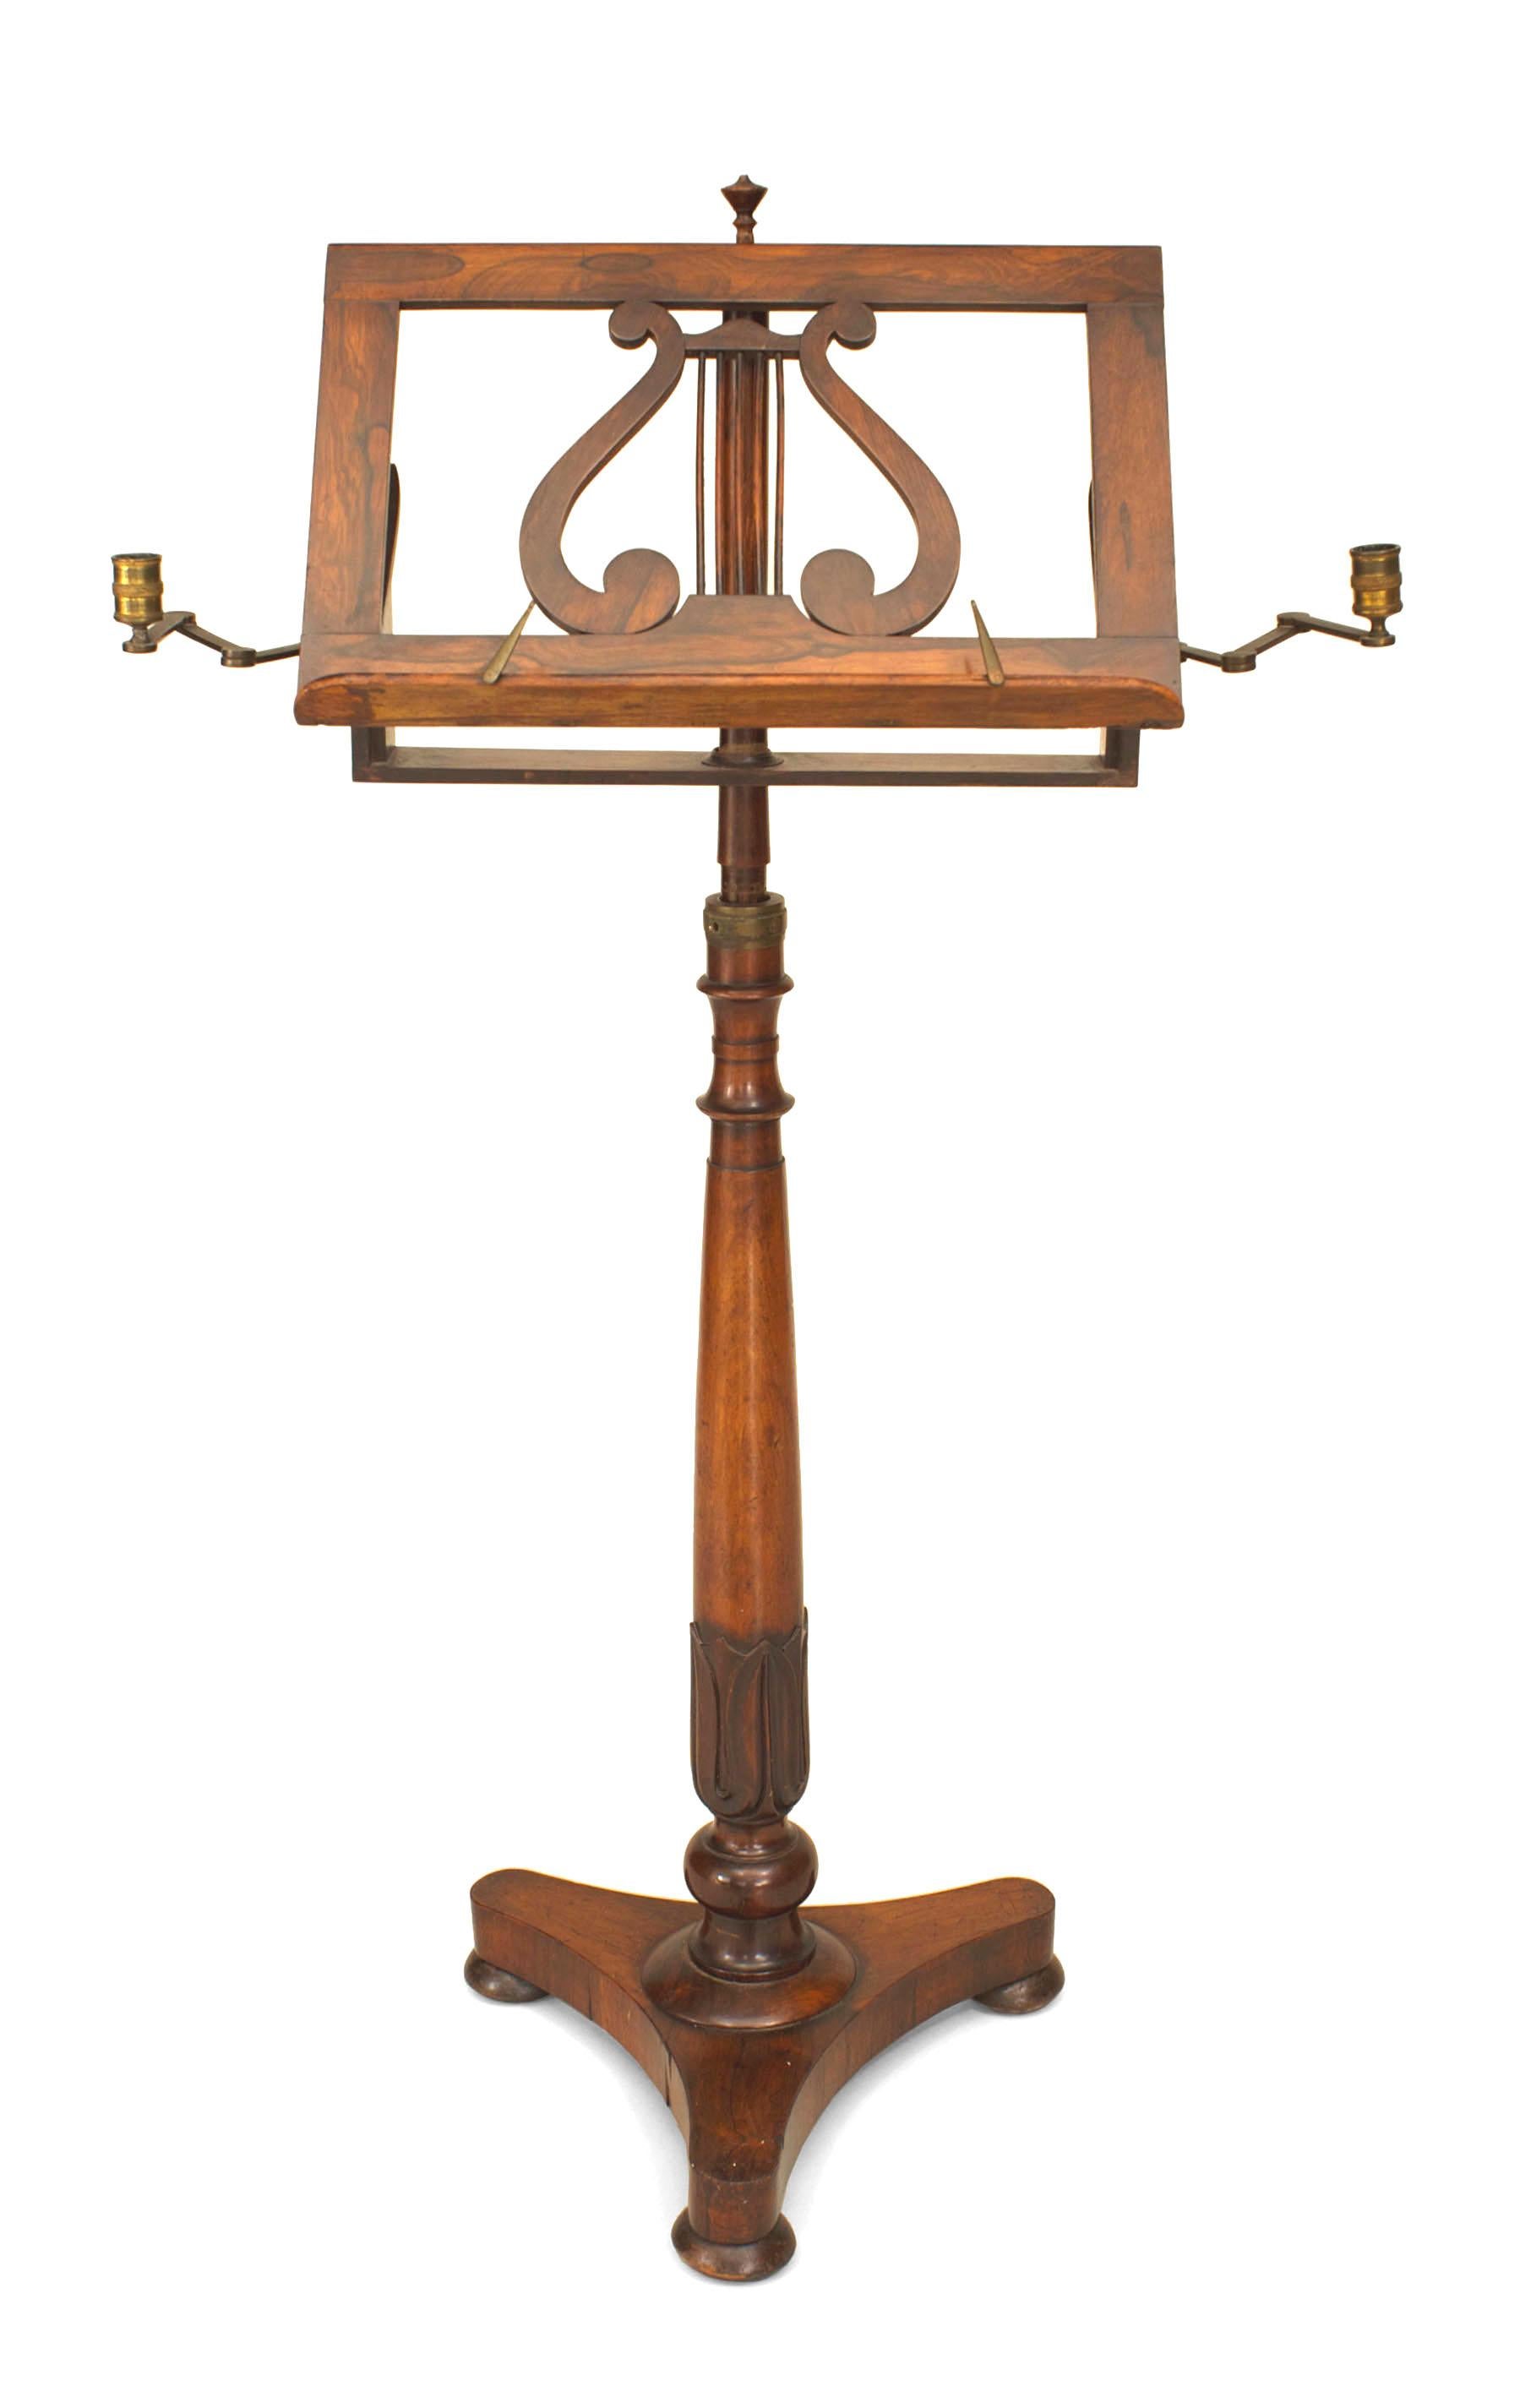 English Regency rosewood pedestal base music stand with an adjustable lyre design rack and 2 side telescoping brass candleholders.
